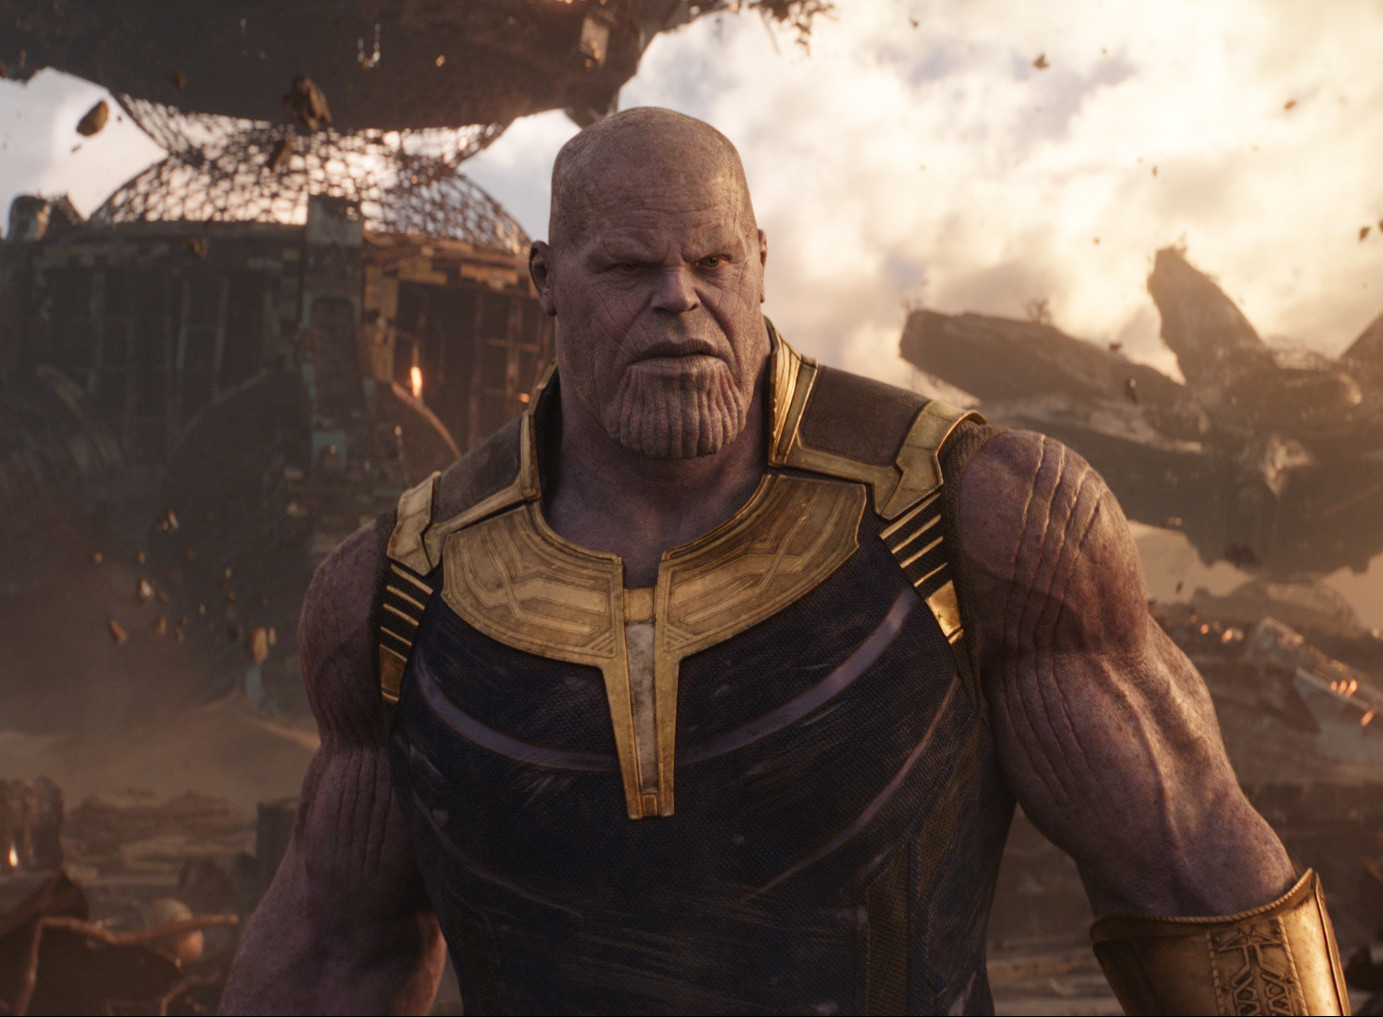 Warning: The following story contains MAJOR SPOILERS for Avengers: Infinity War.